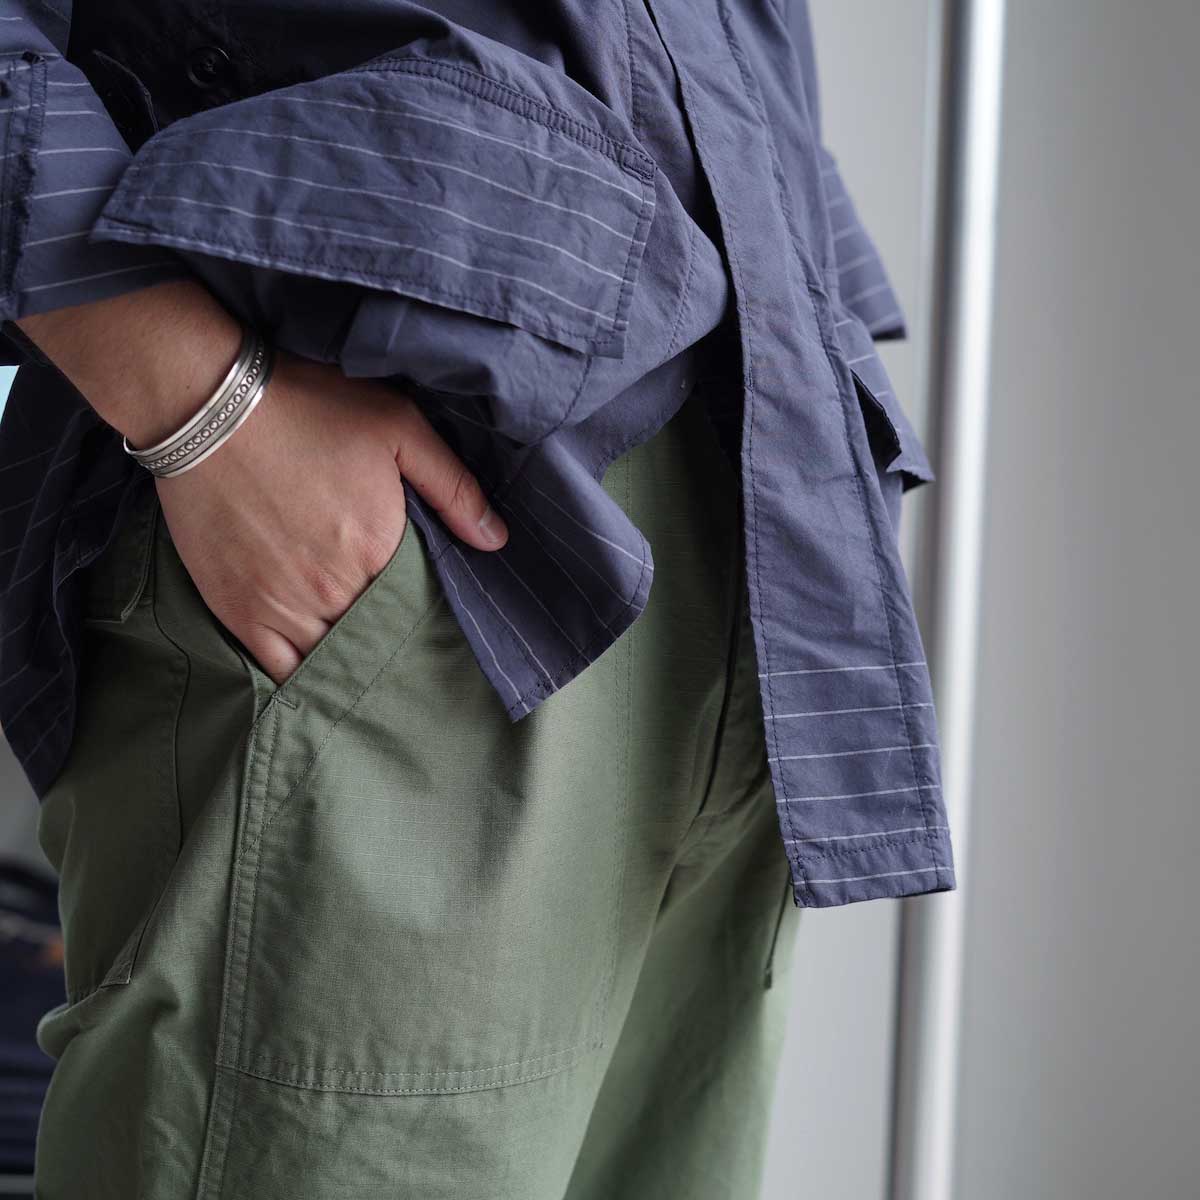 ENGINEERED GARMENTS / FATIGUE PANTS - Cotton Ripstop (Olive)生地感